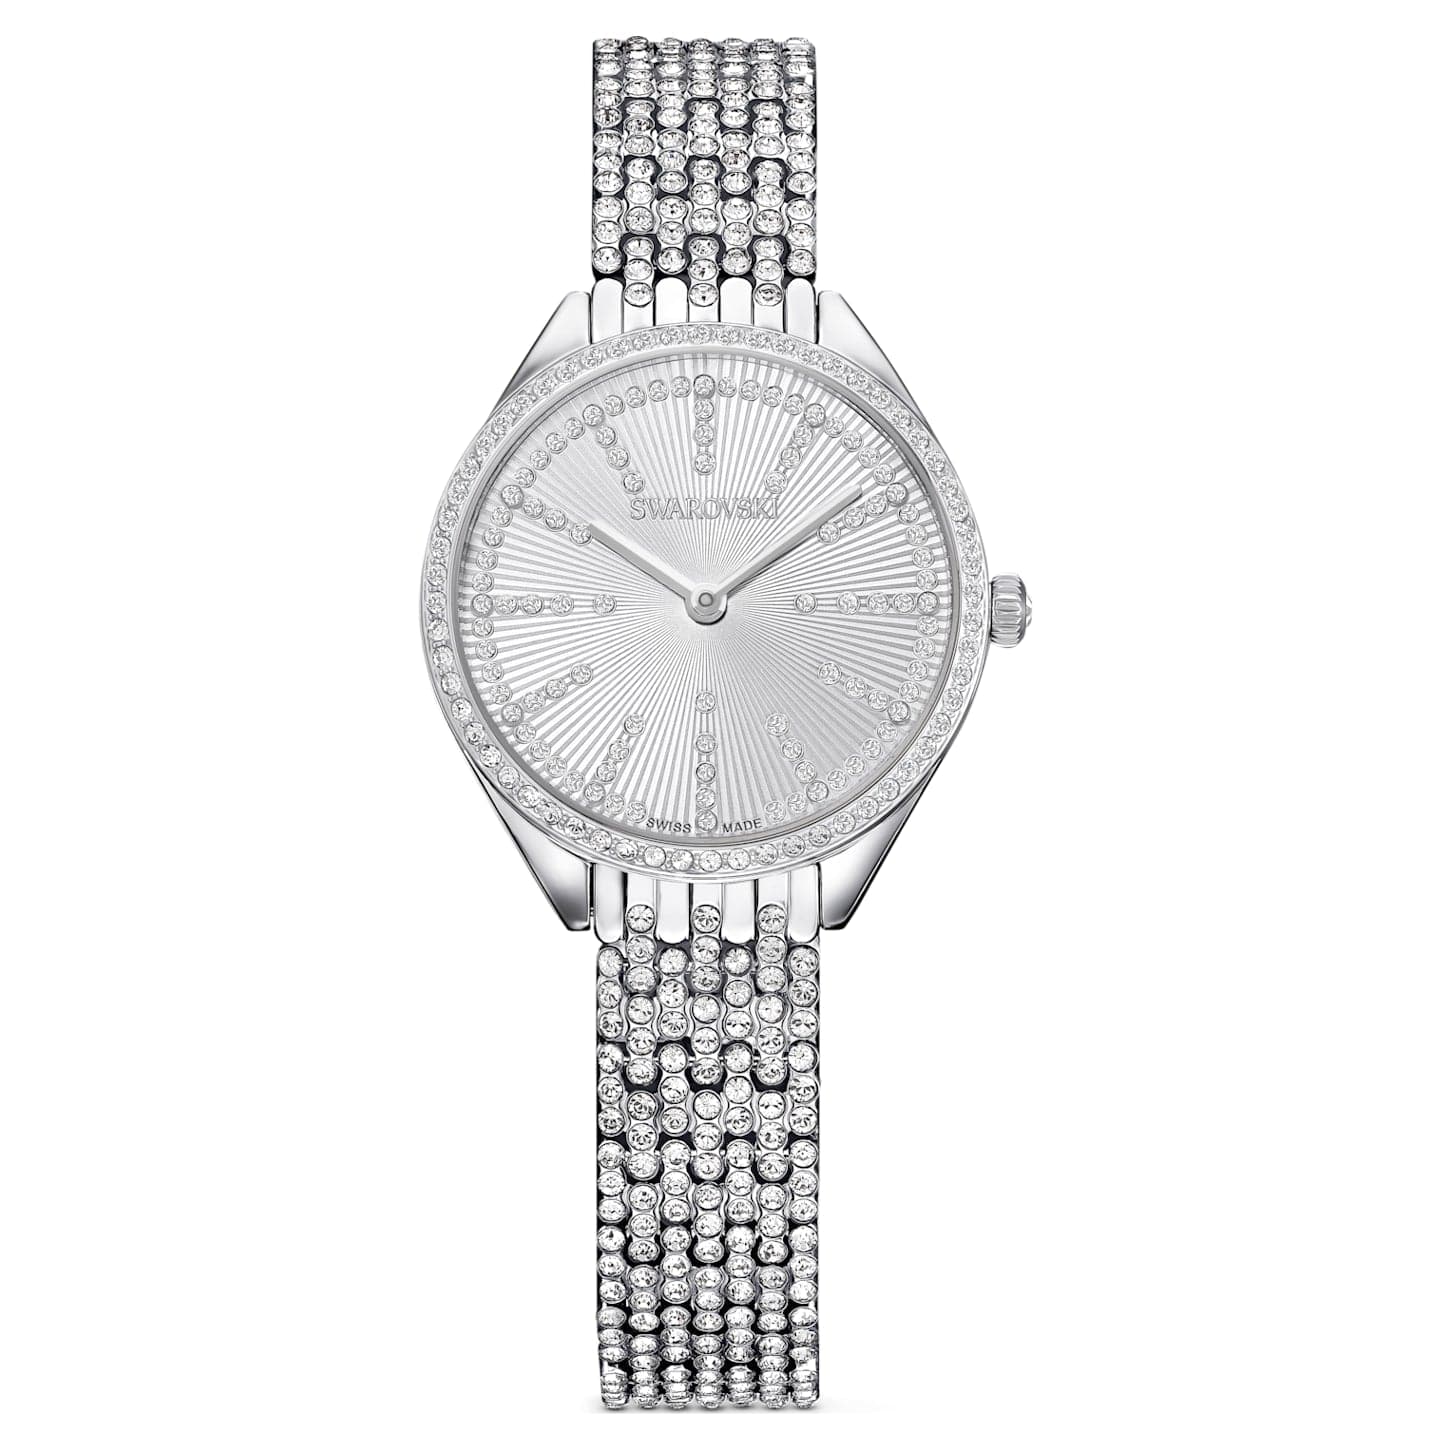 Attract watch Swiss Made, Full pavé, Metal bracelet, Silver tone, Stainless steel - Kamal Watch Company